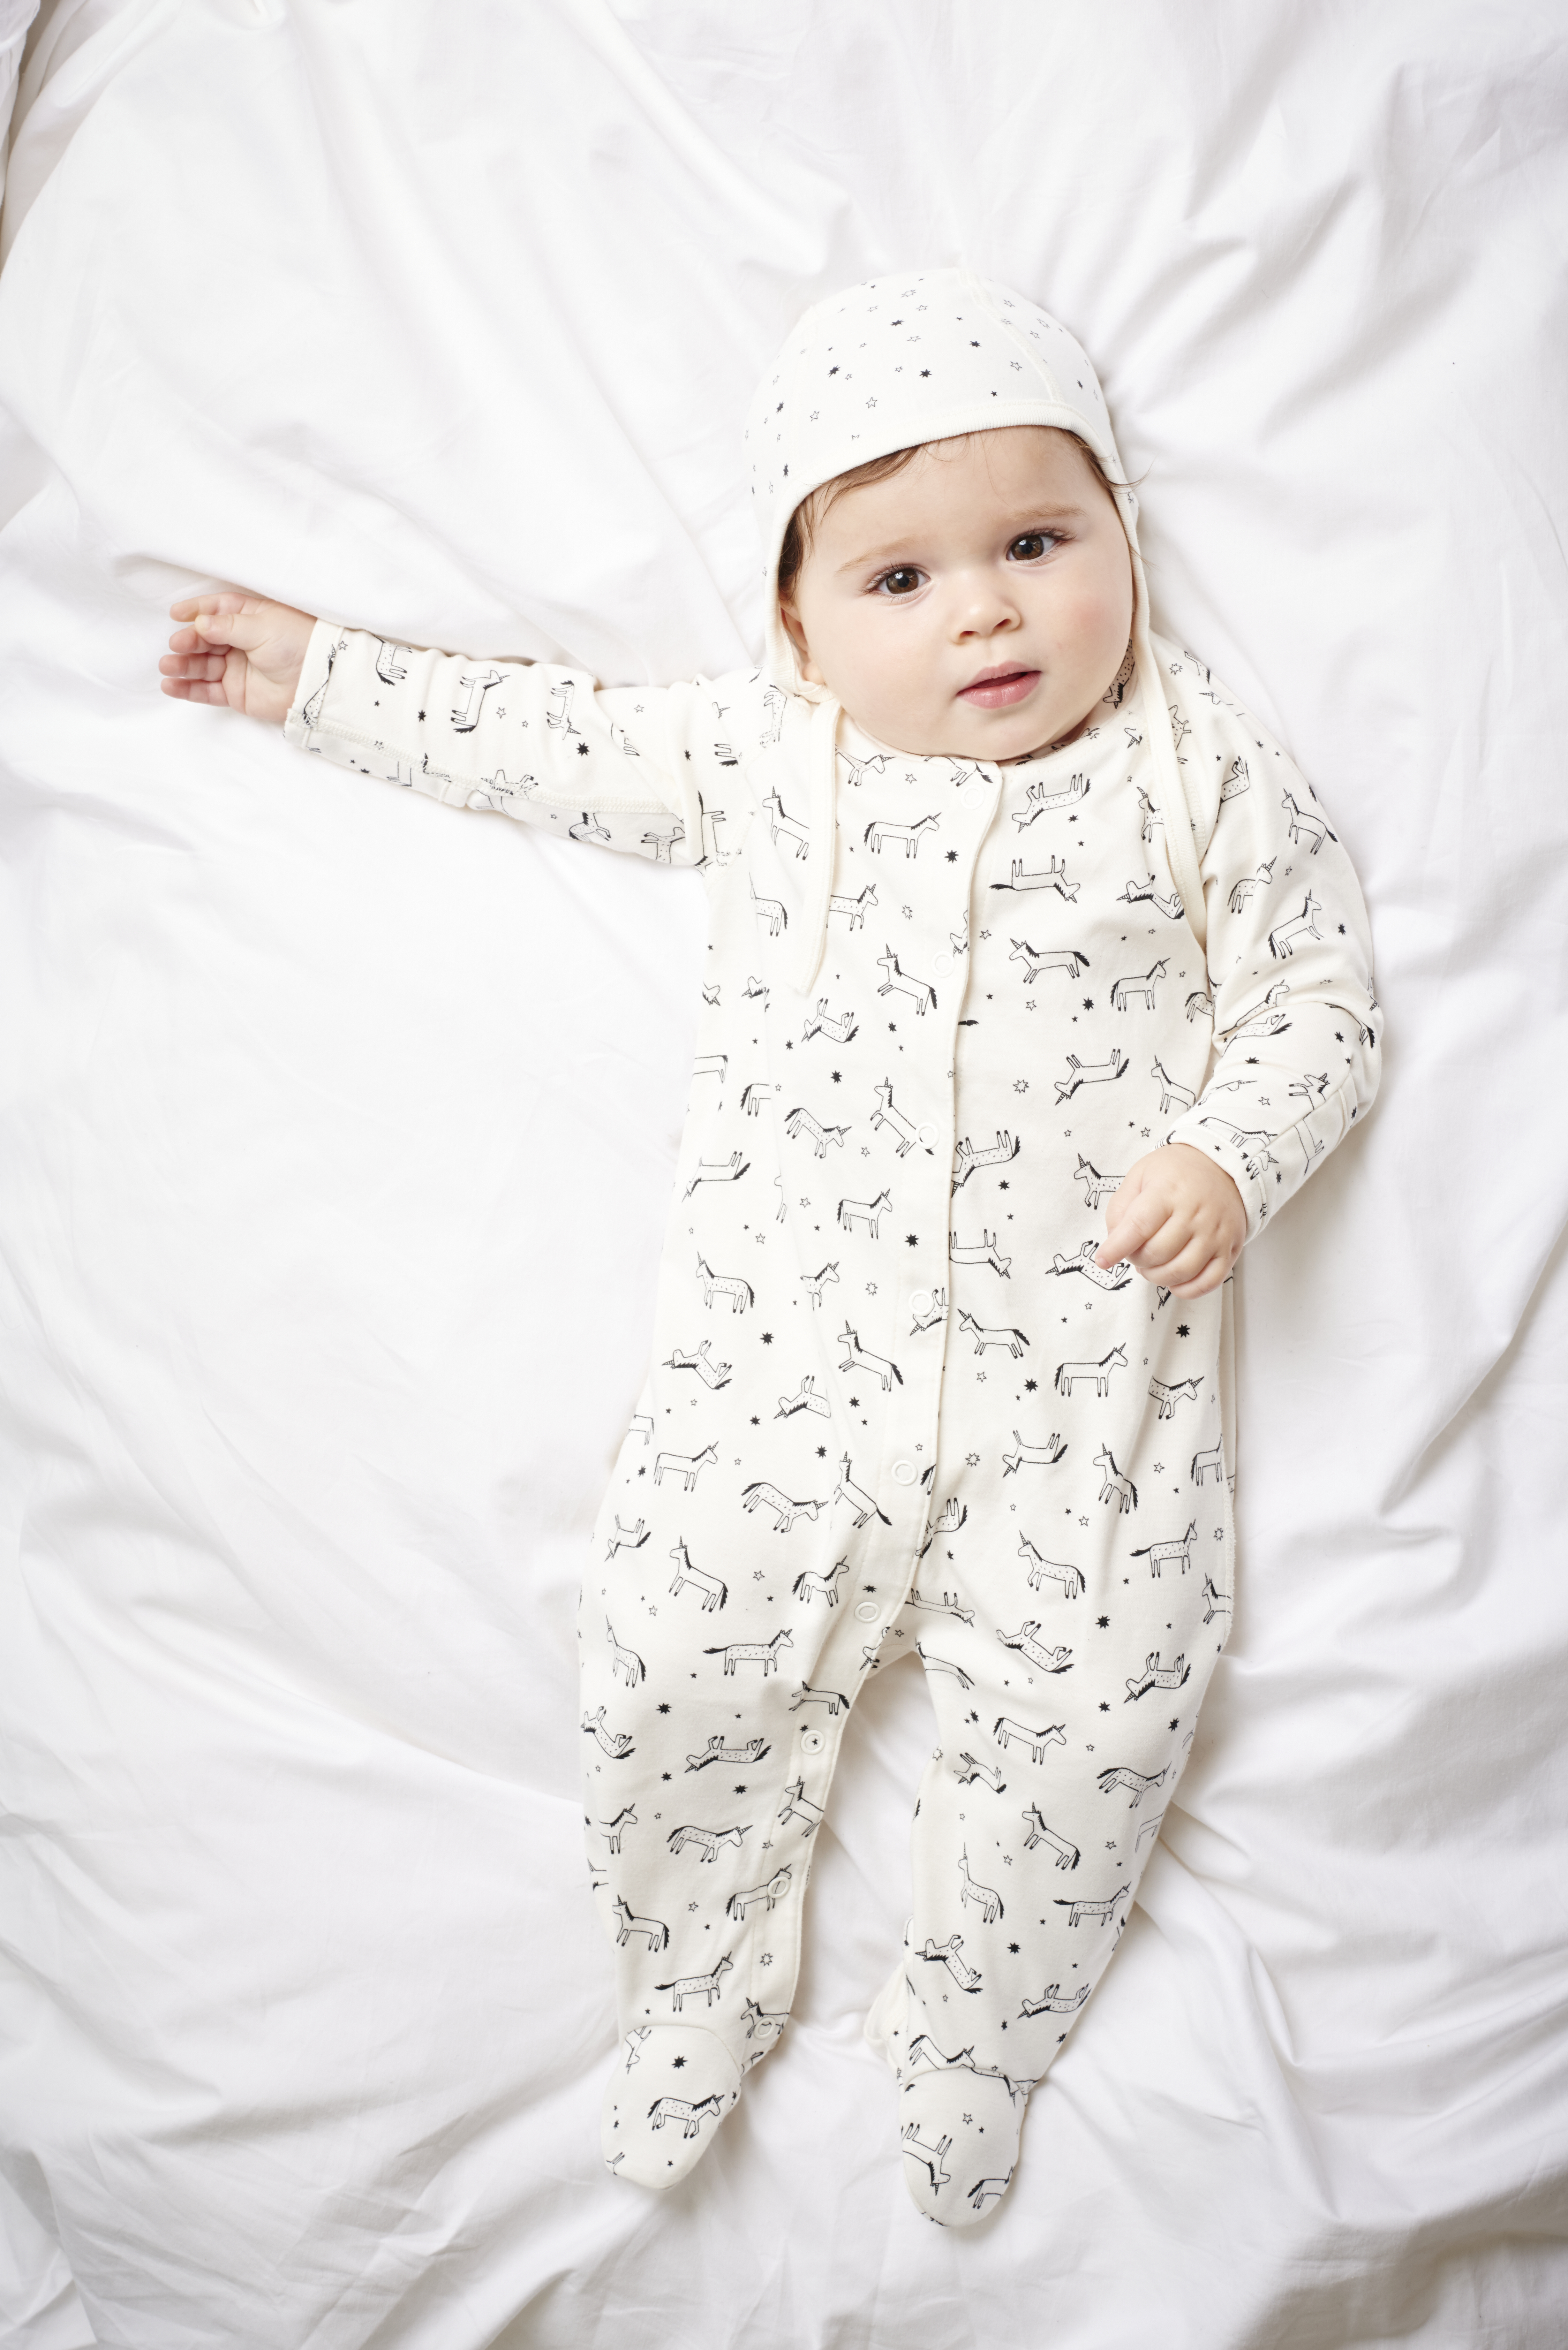 Hanna Andersson Organic Pima Cotton Layette Collection